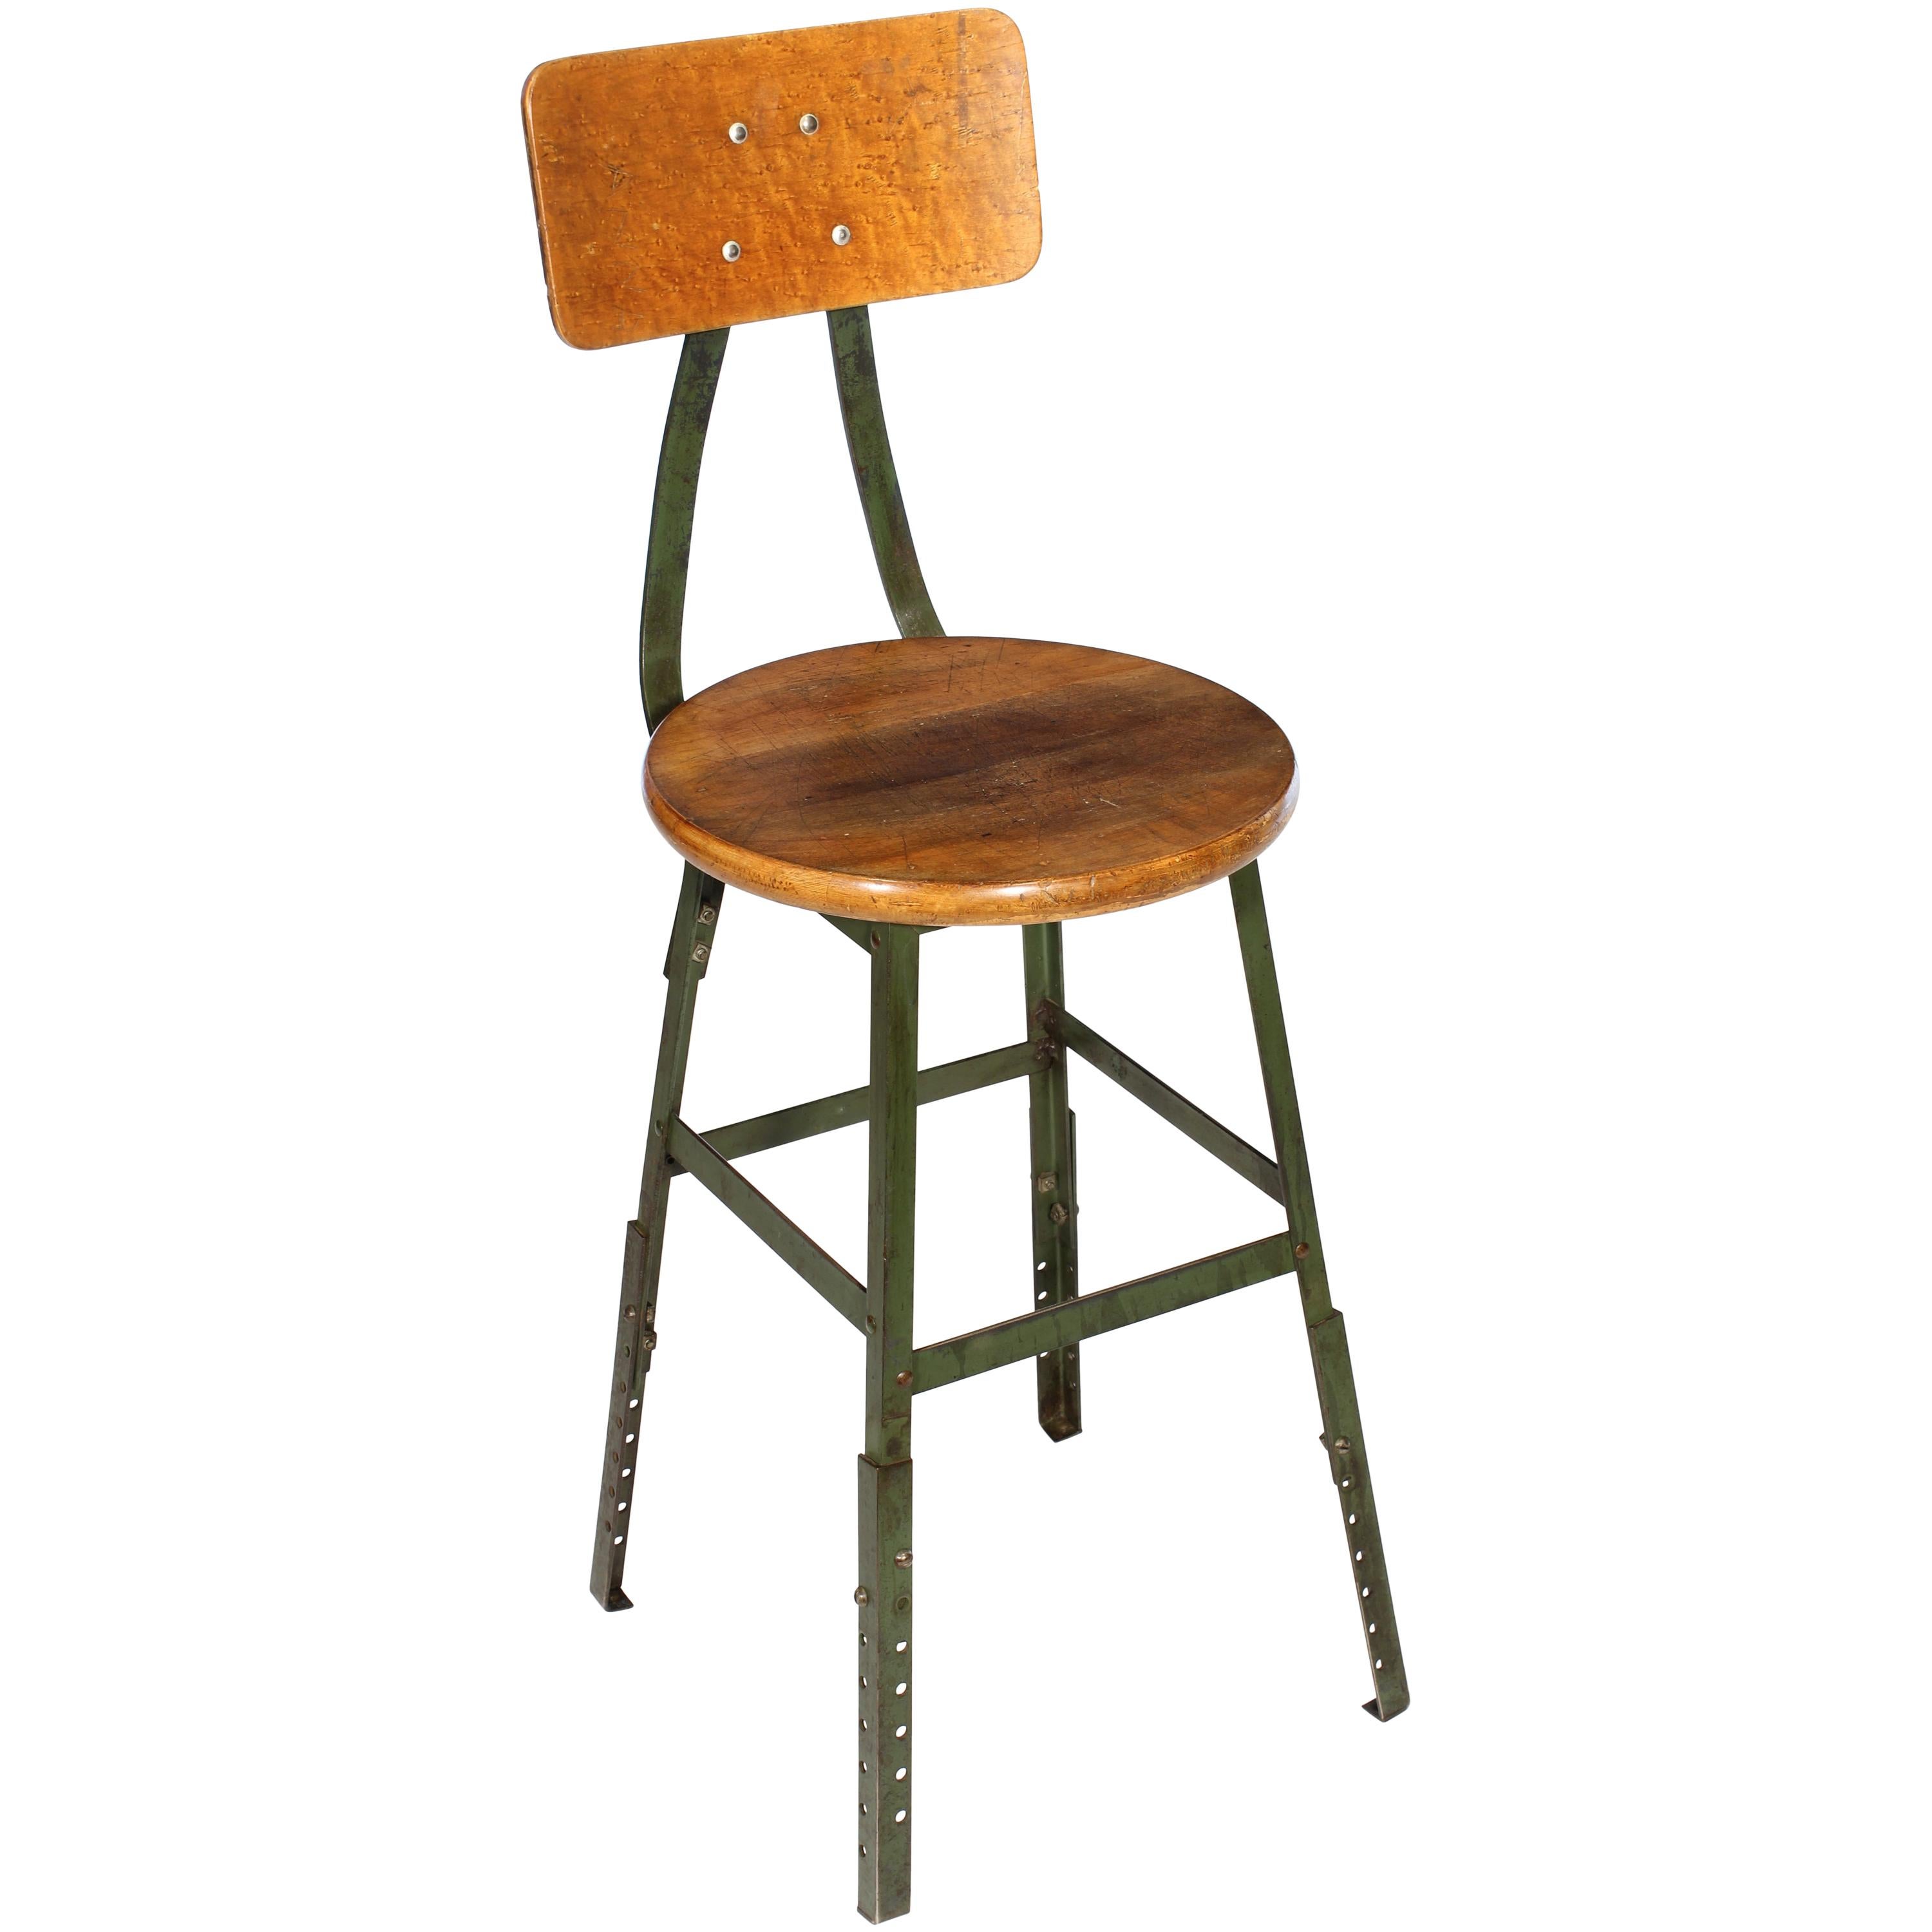 Authentic Vintage Industrial Factory Stool For Sale